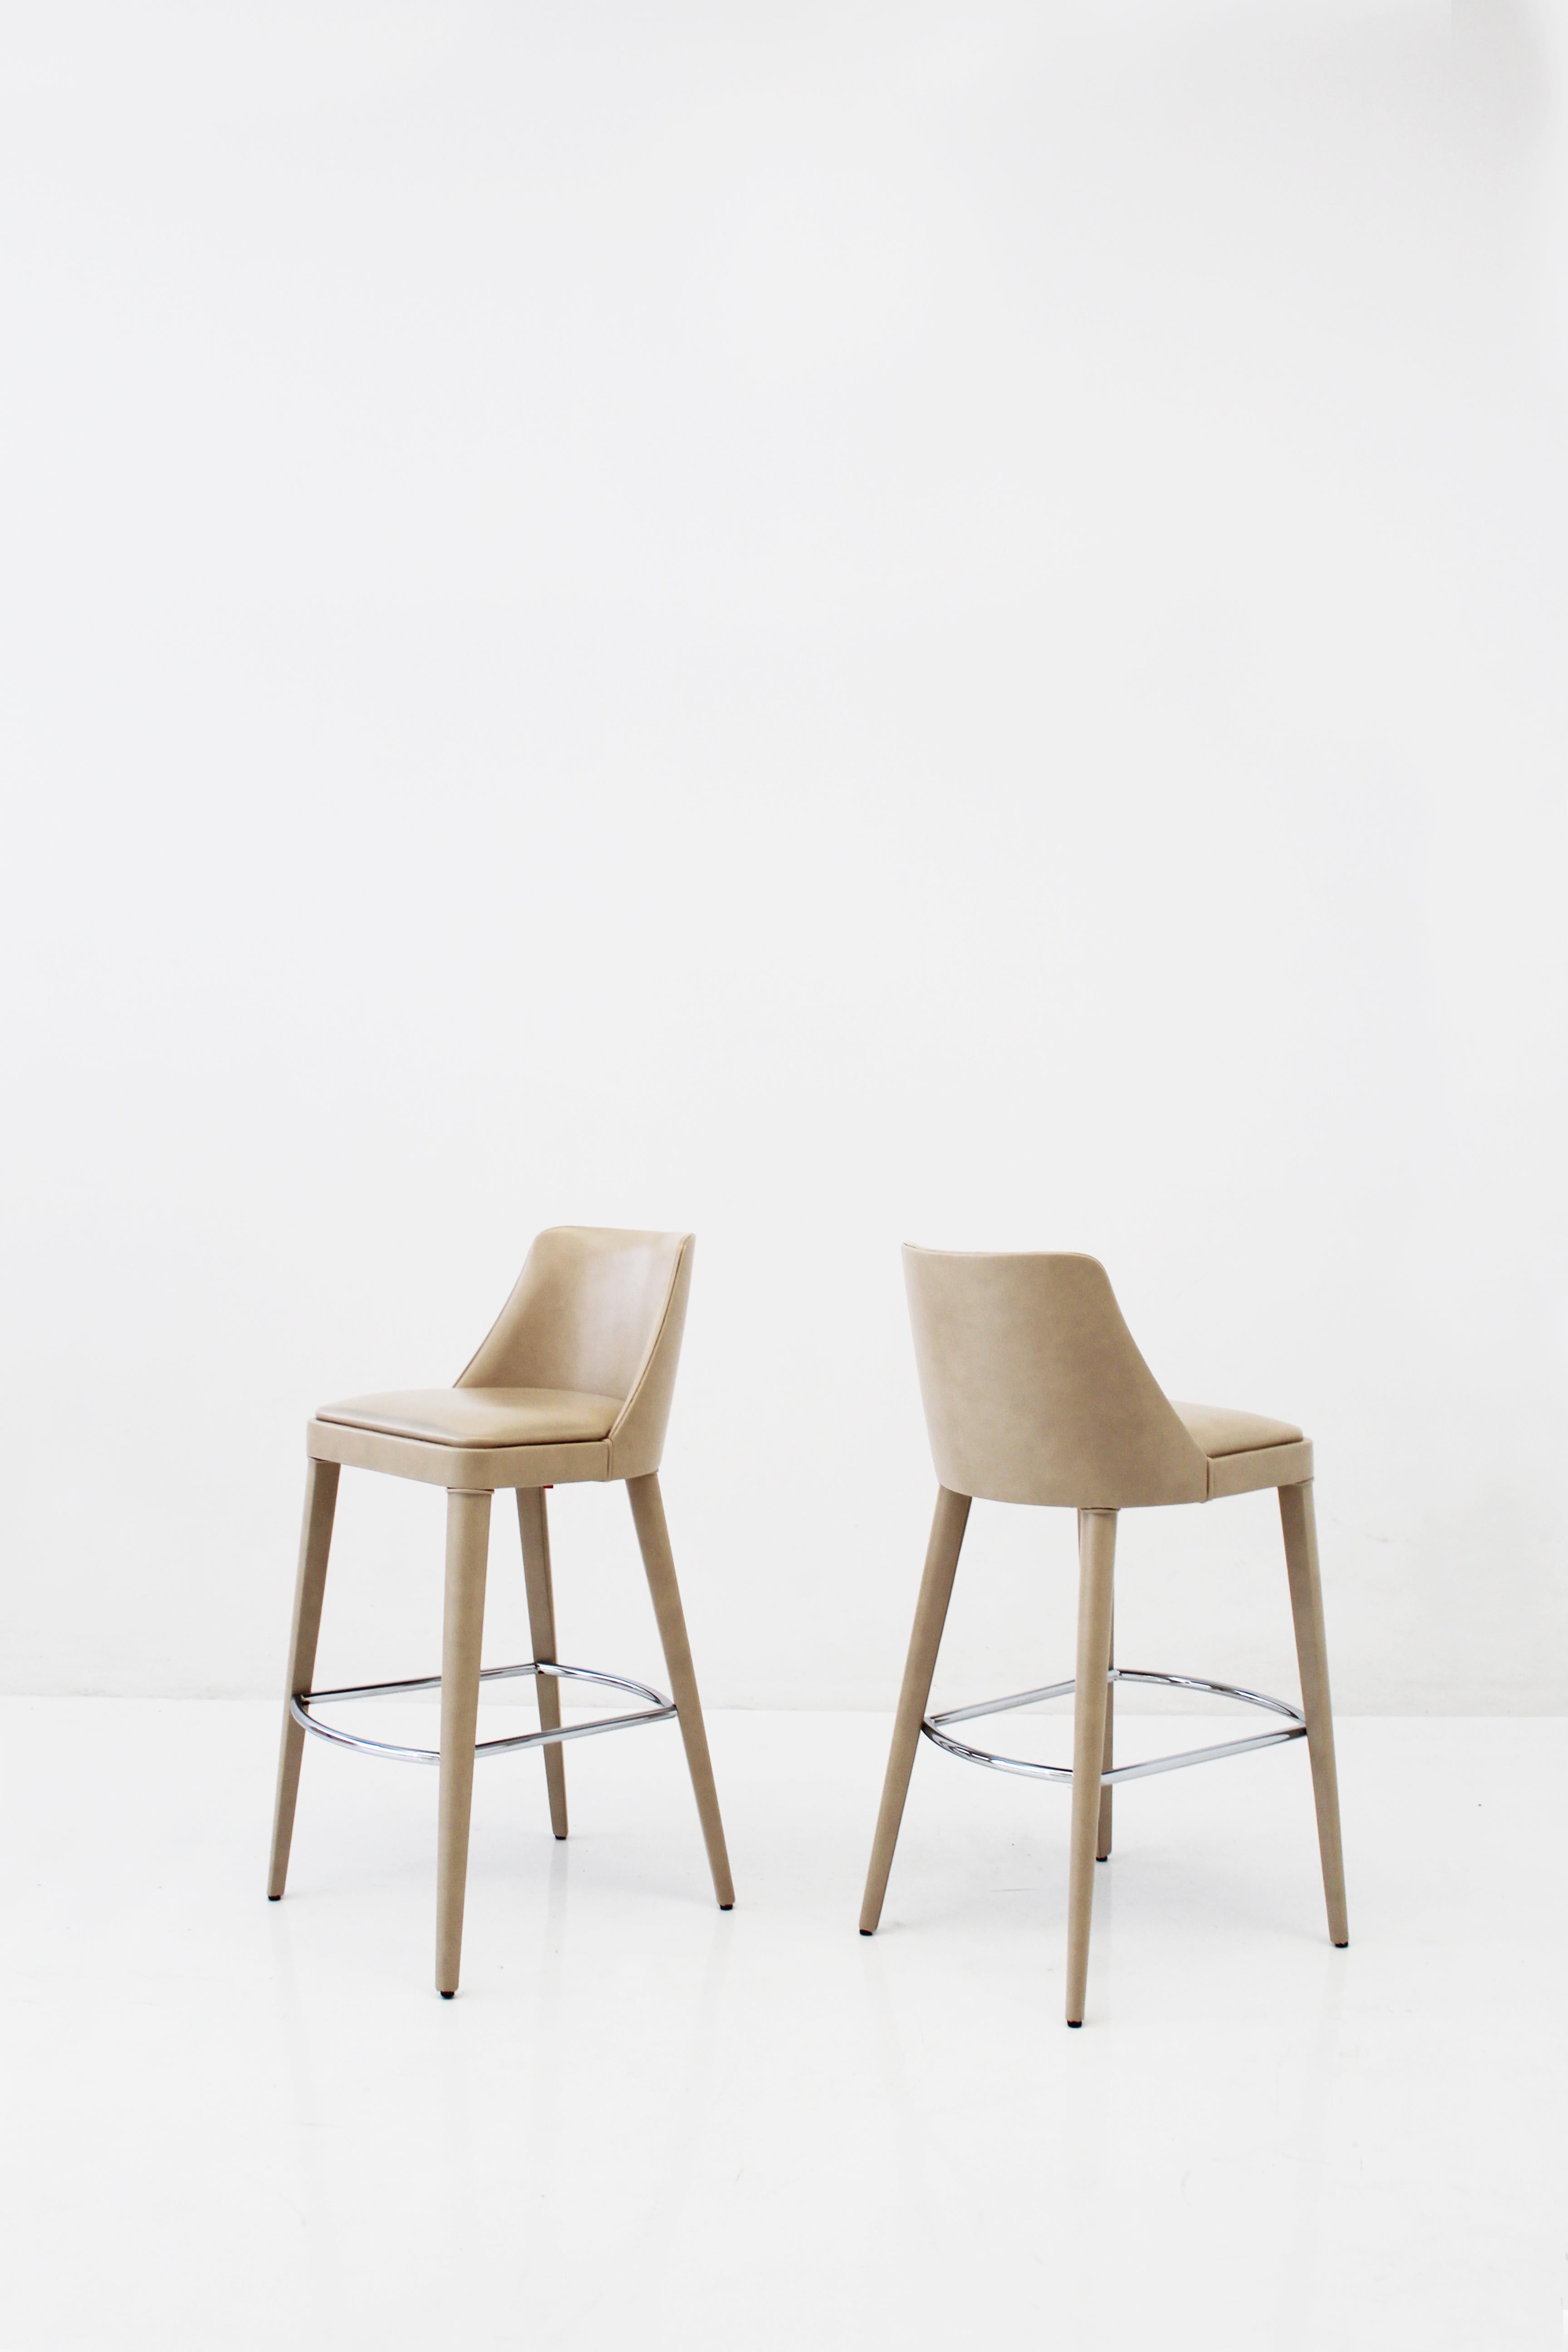 Italian Lola, the Super Comfortable Stool in leather For Sale